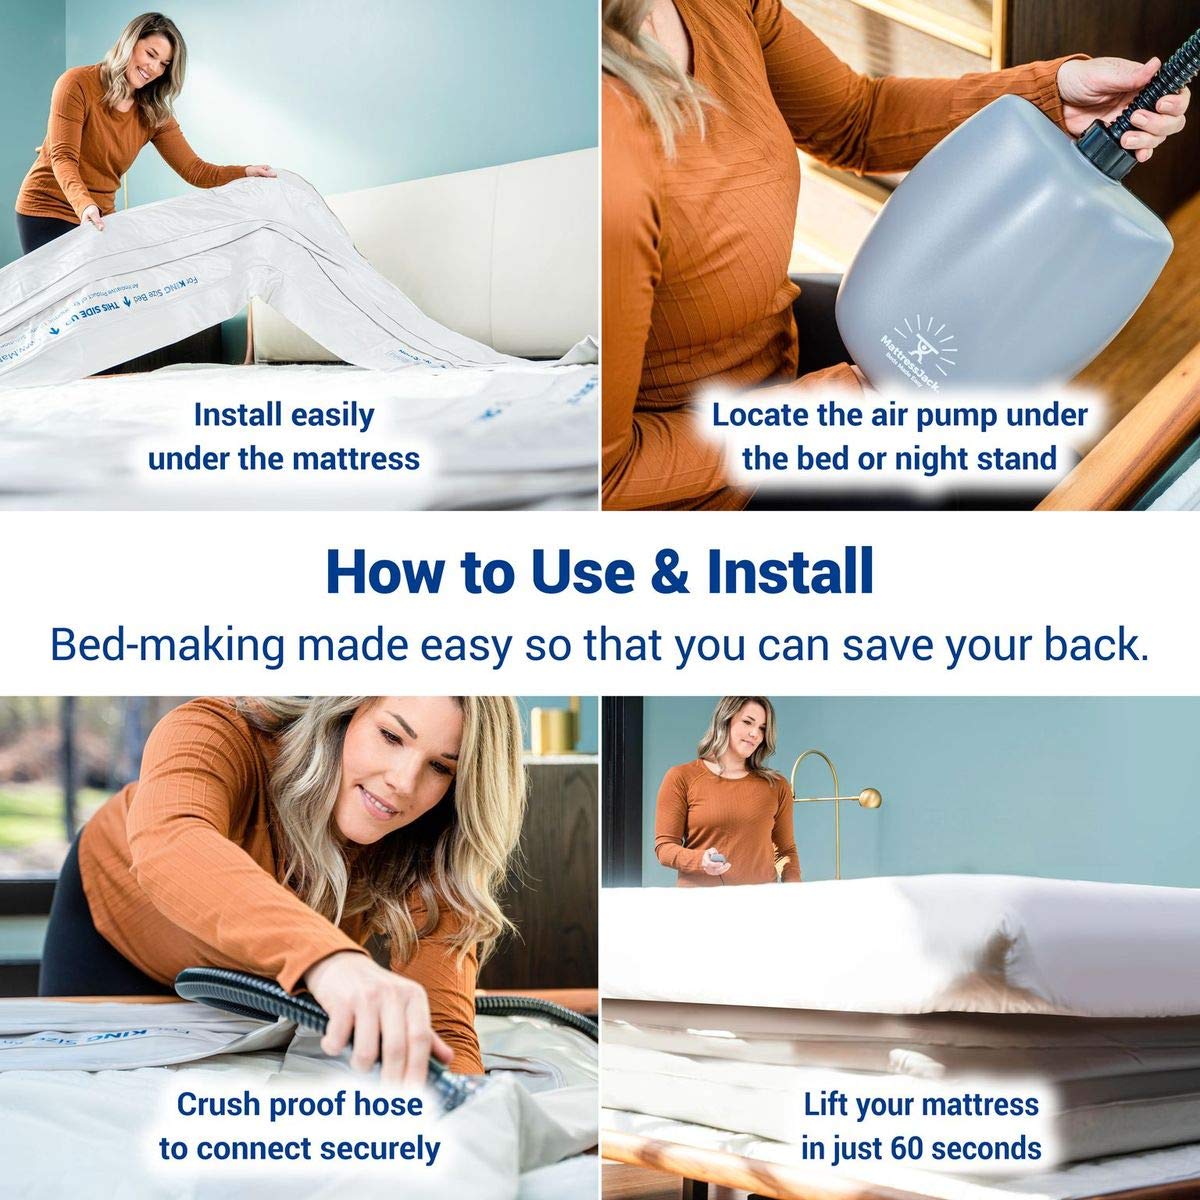 Mattress Jack Mattress Elevator - Easy Use Lifter for Sheet Tucking & Bed Making - Ergonomic Mobility & Daily Living Aid for Elderly, with Inflatable Ring, Air Pump, & Switch, Queen